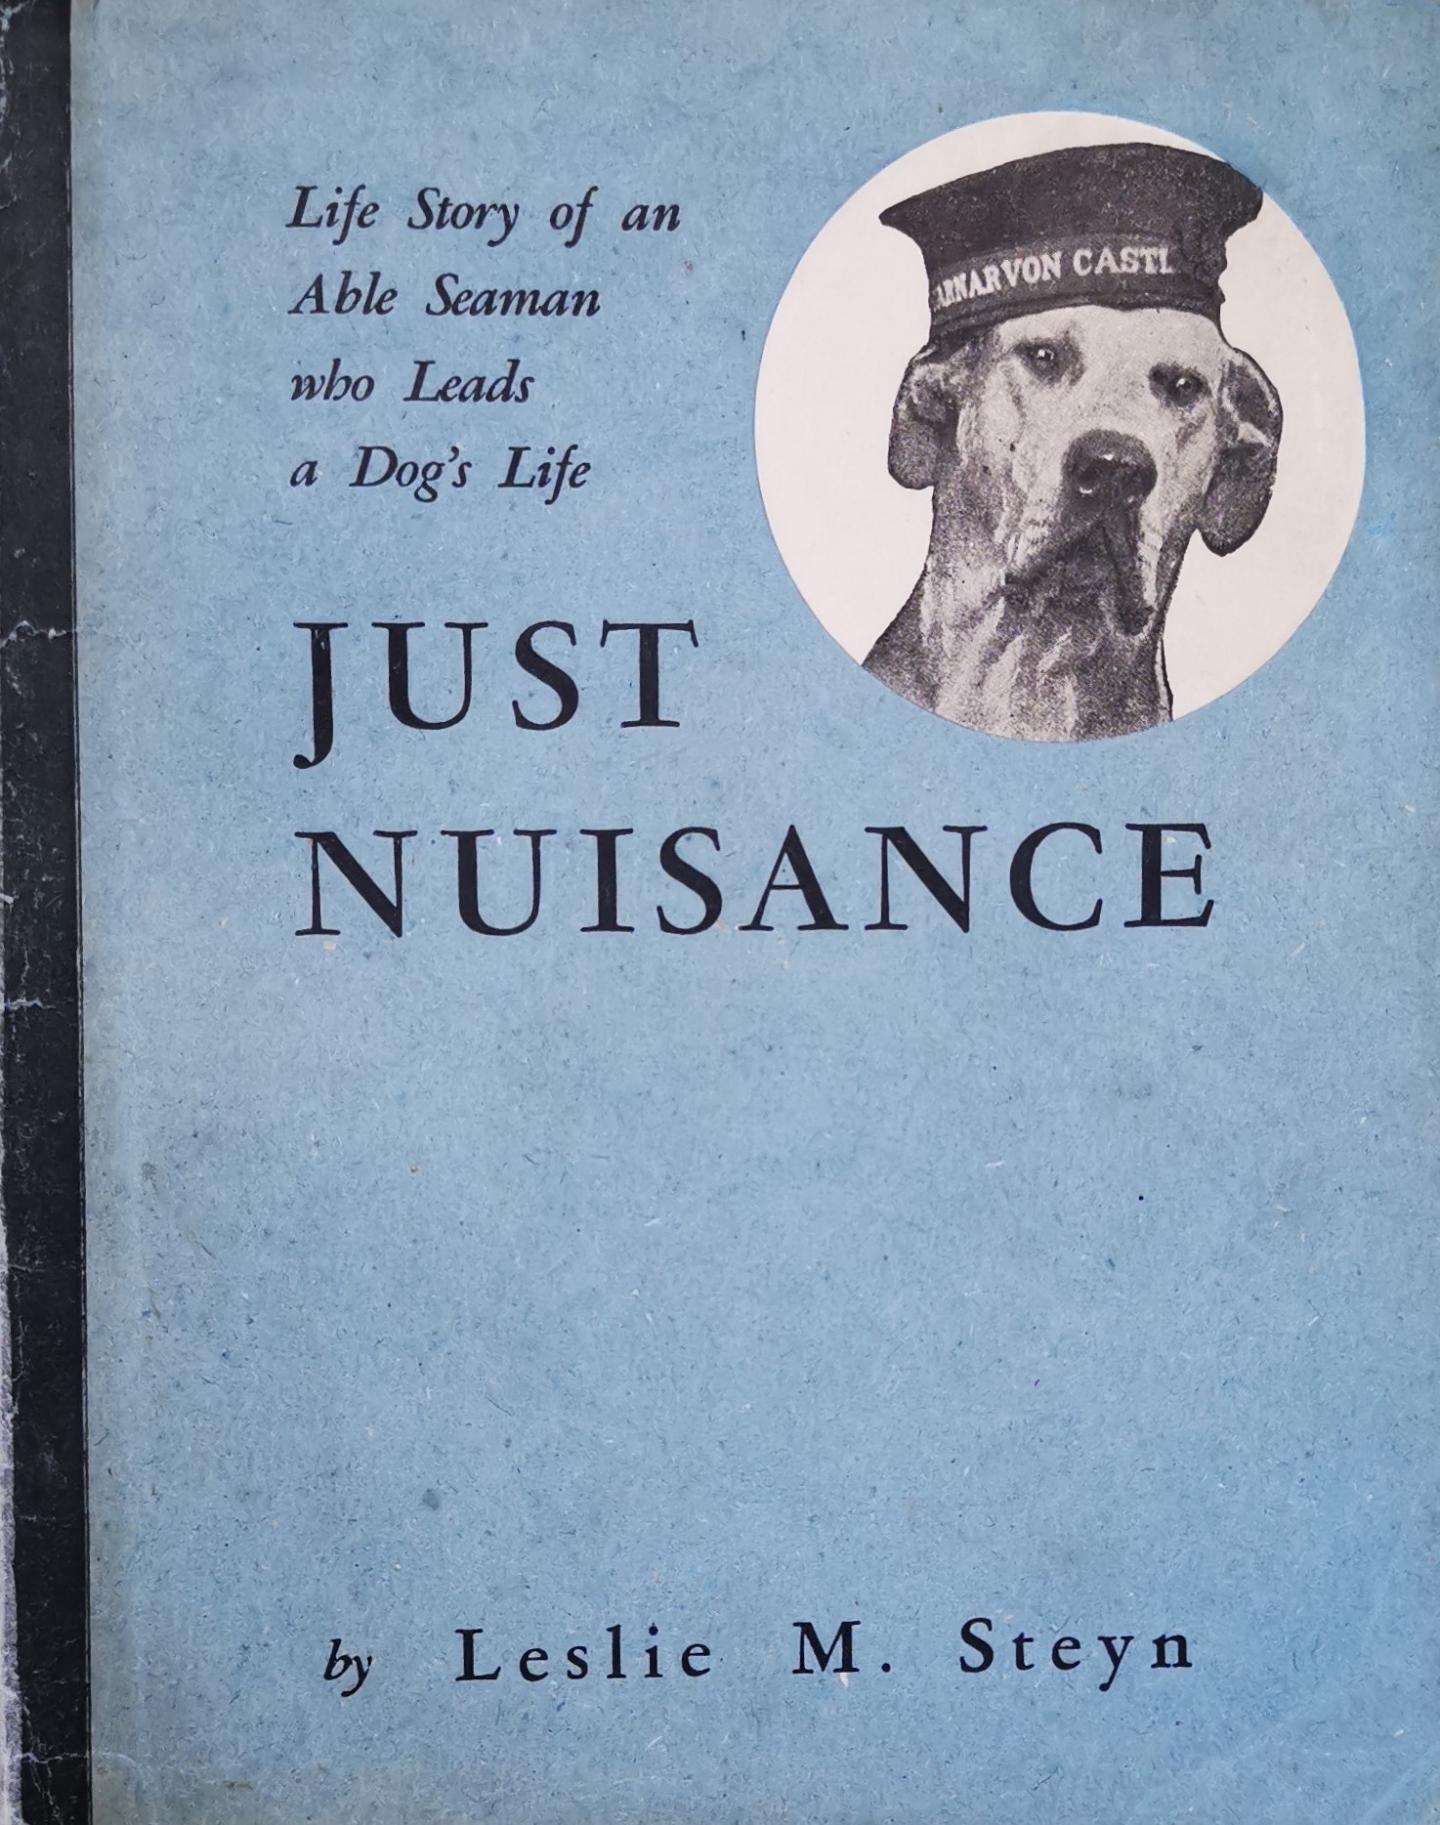 Front cover of Just Nuisance by Leslie M. Steyn